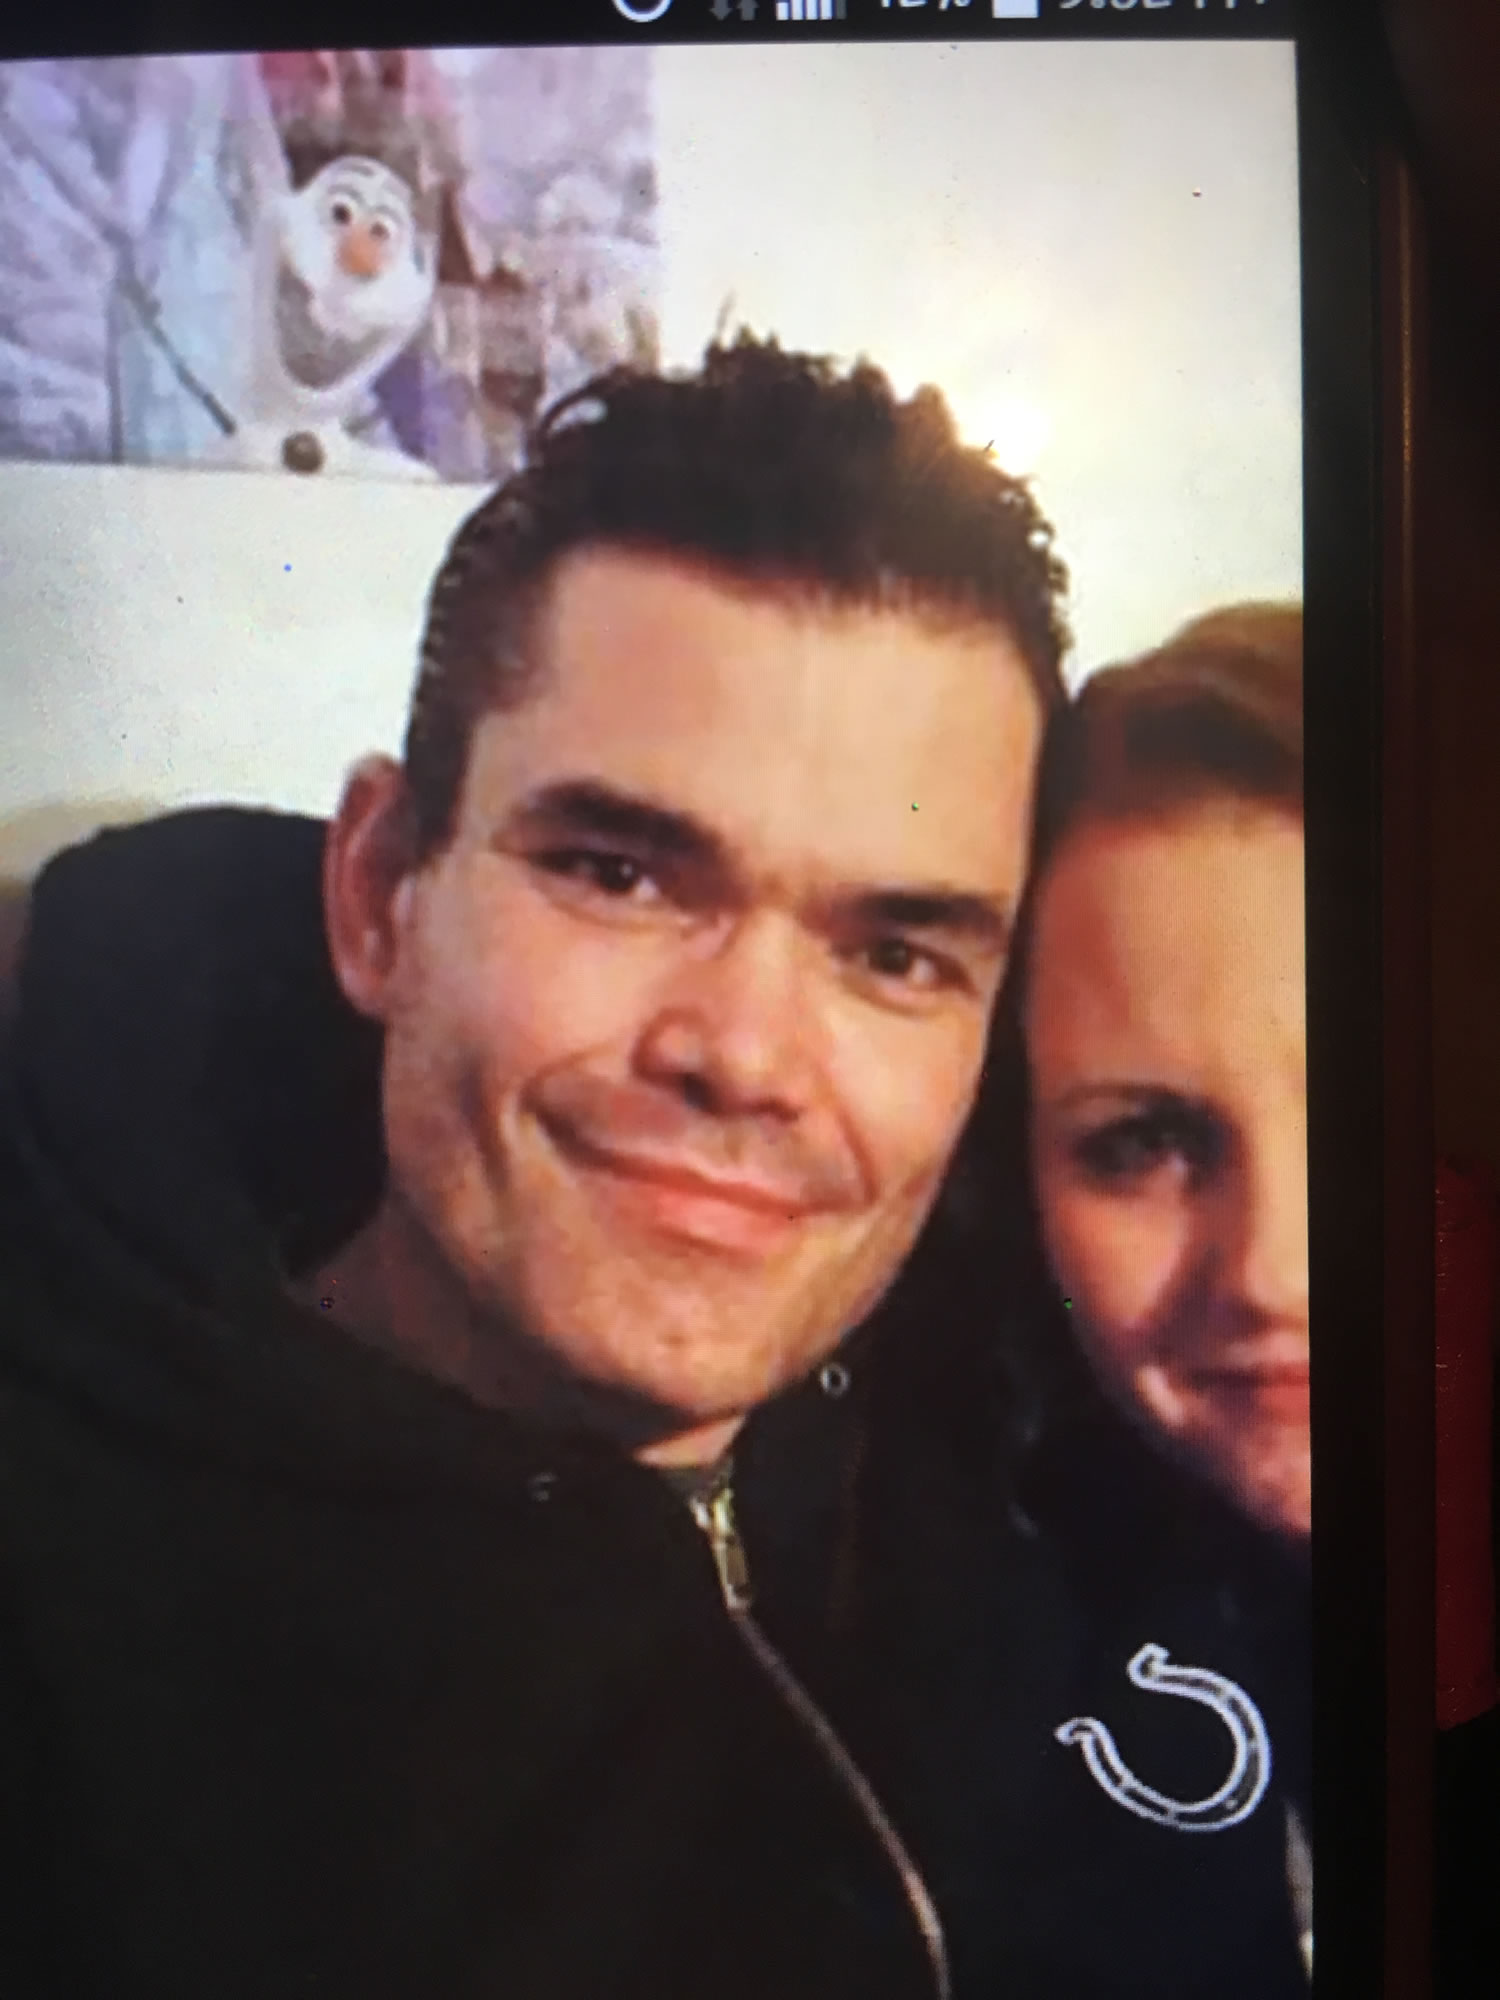 Vancouver police are asking for the public's help finding 41-year-old James Rennells, who was last seen Friday and may be in the vicinity of Leverich Park.